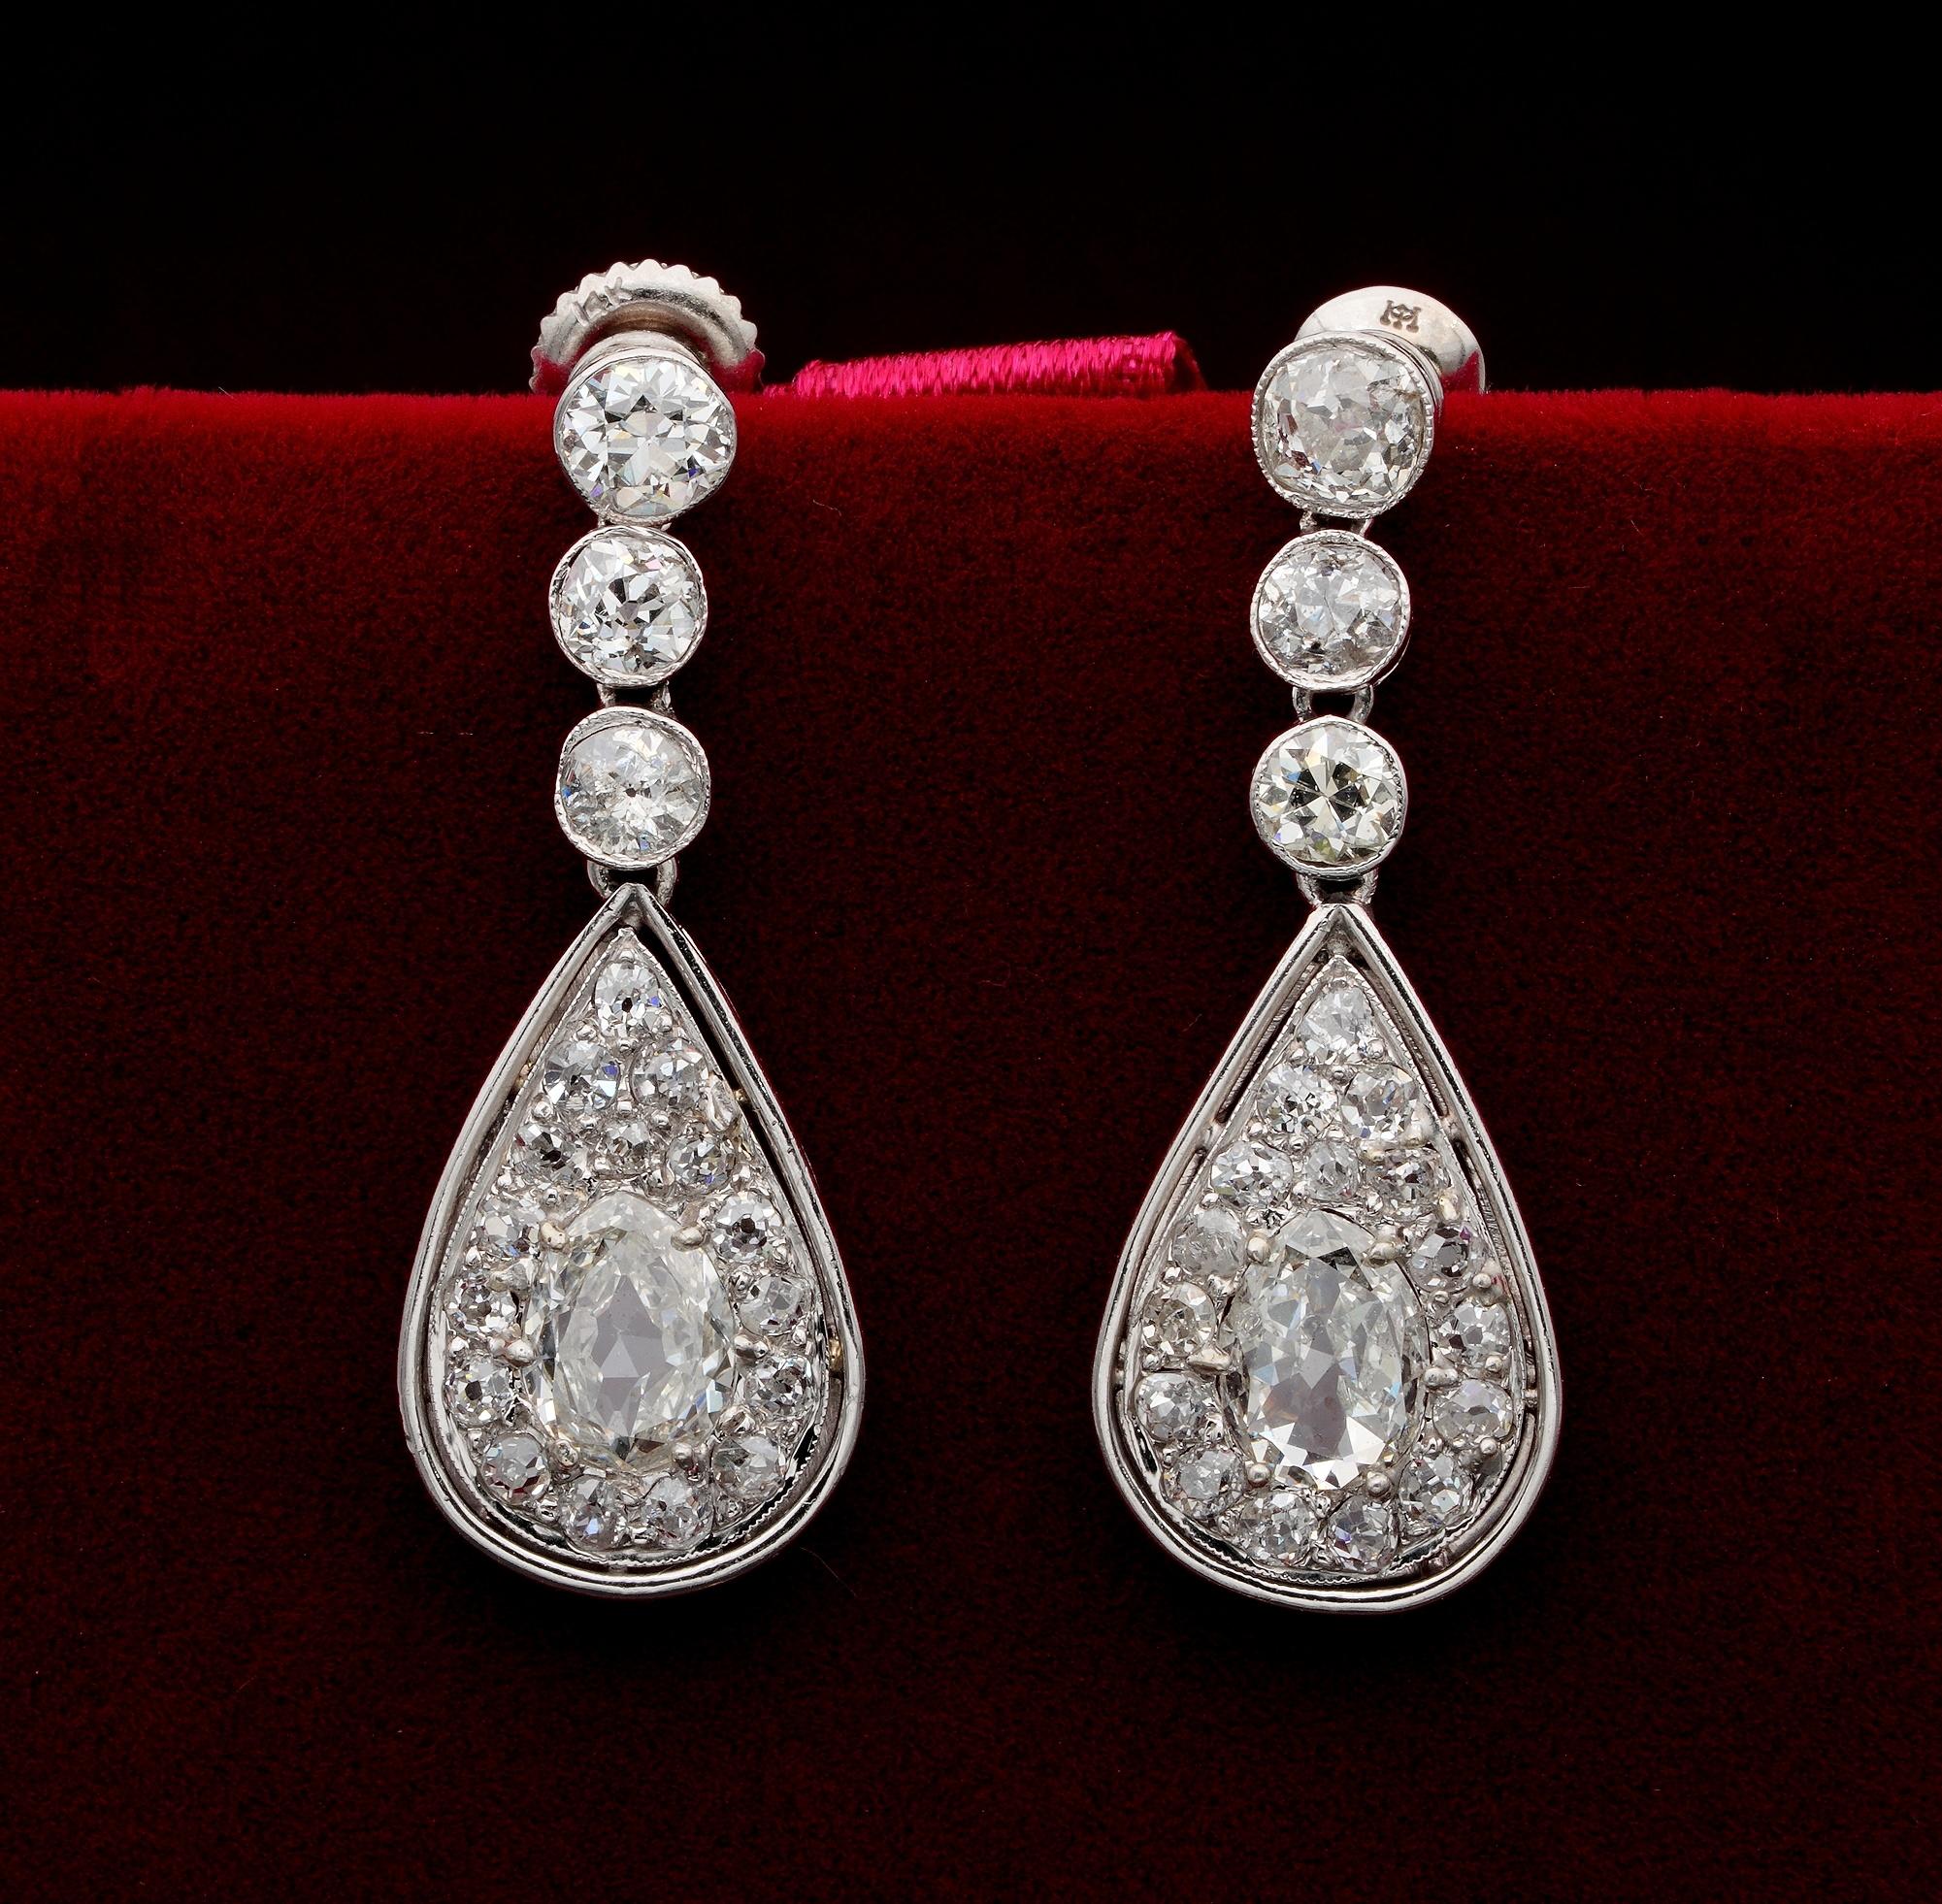 Authentic Edwardian platinum hand crafted classy shape Diamond drop earrings.
Sleek elegant design boasting 4.60 Ct Old mine cut Diamonds in total
The two maid pear  shaped Diamonds are old mine cut 1.50 Ct for both rated as G VVS for one G SI for